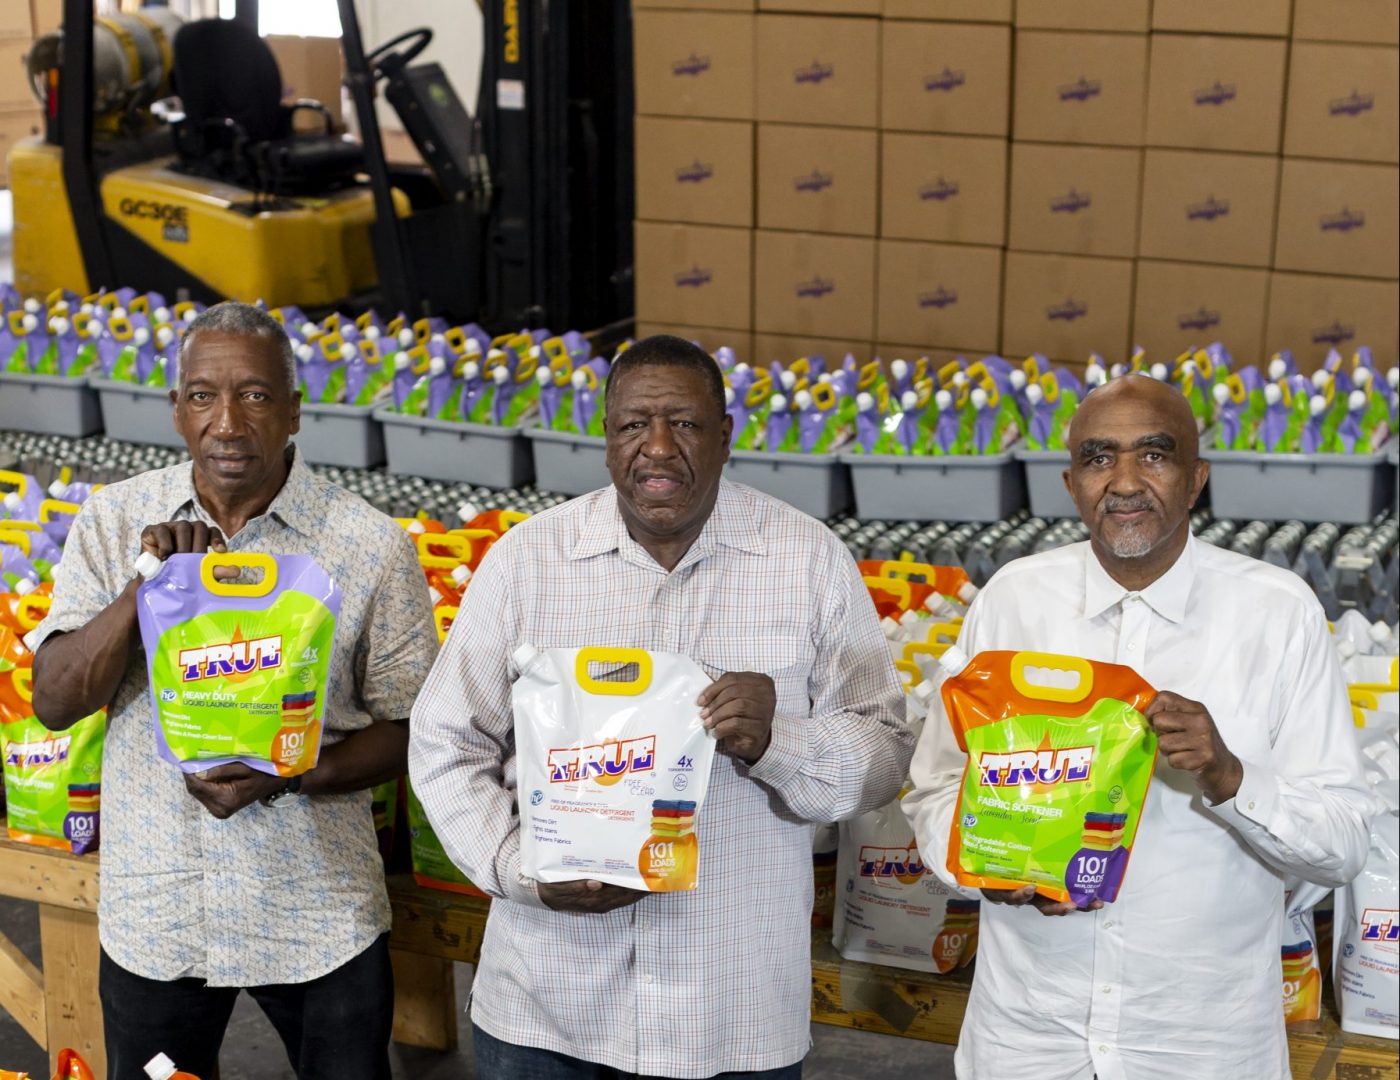 Black veterans join forces to launch True Products detergent company